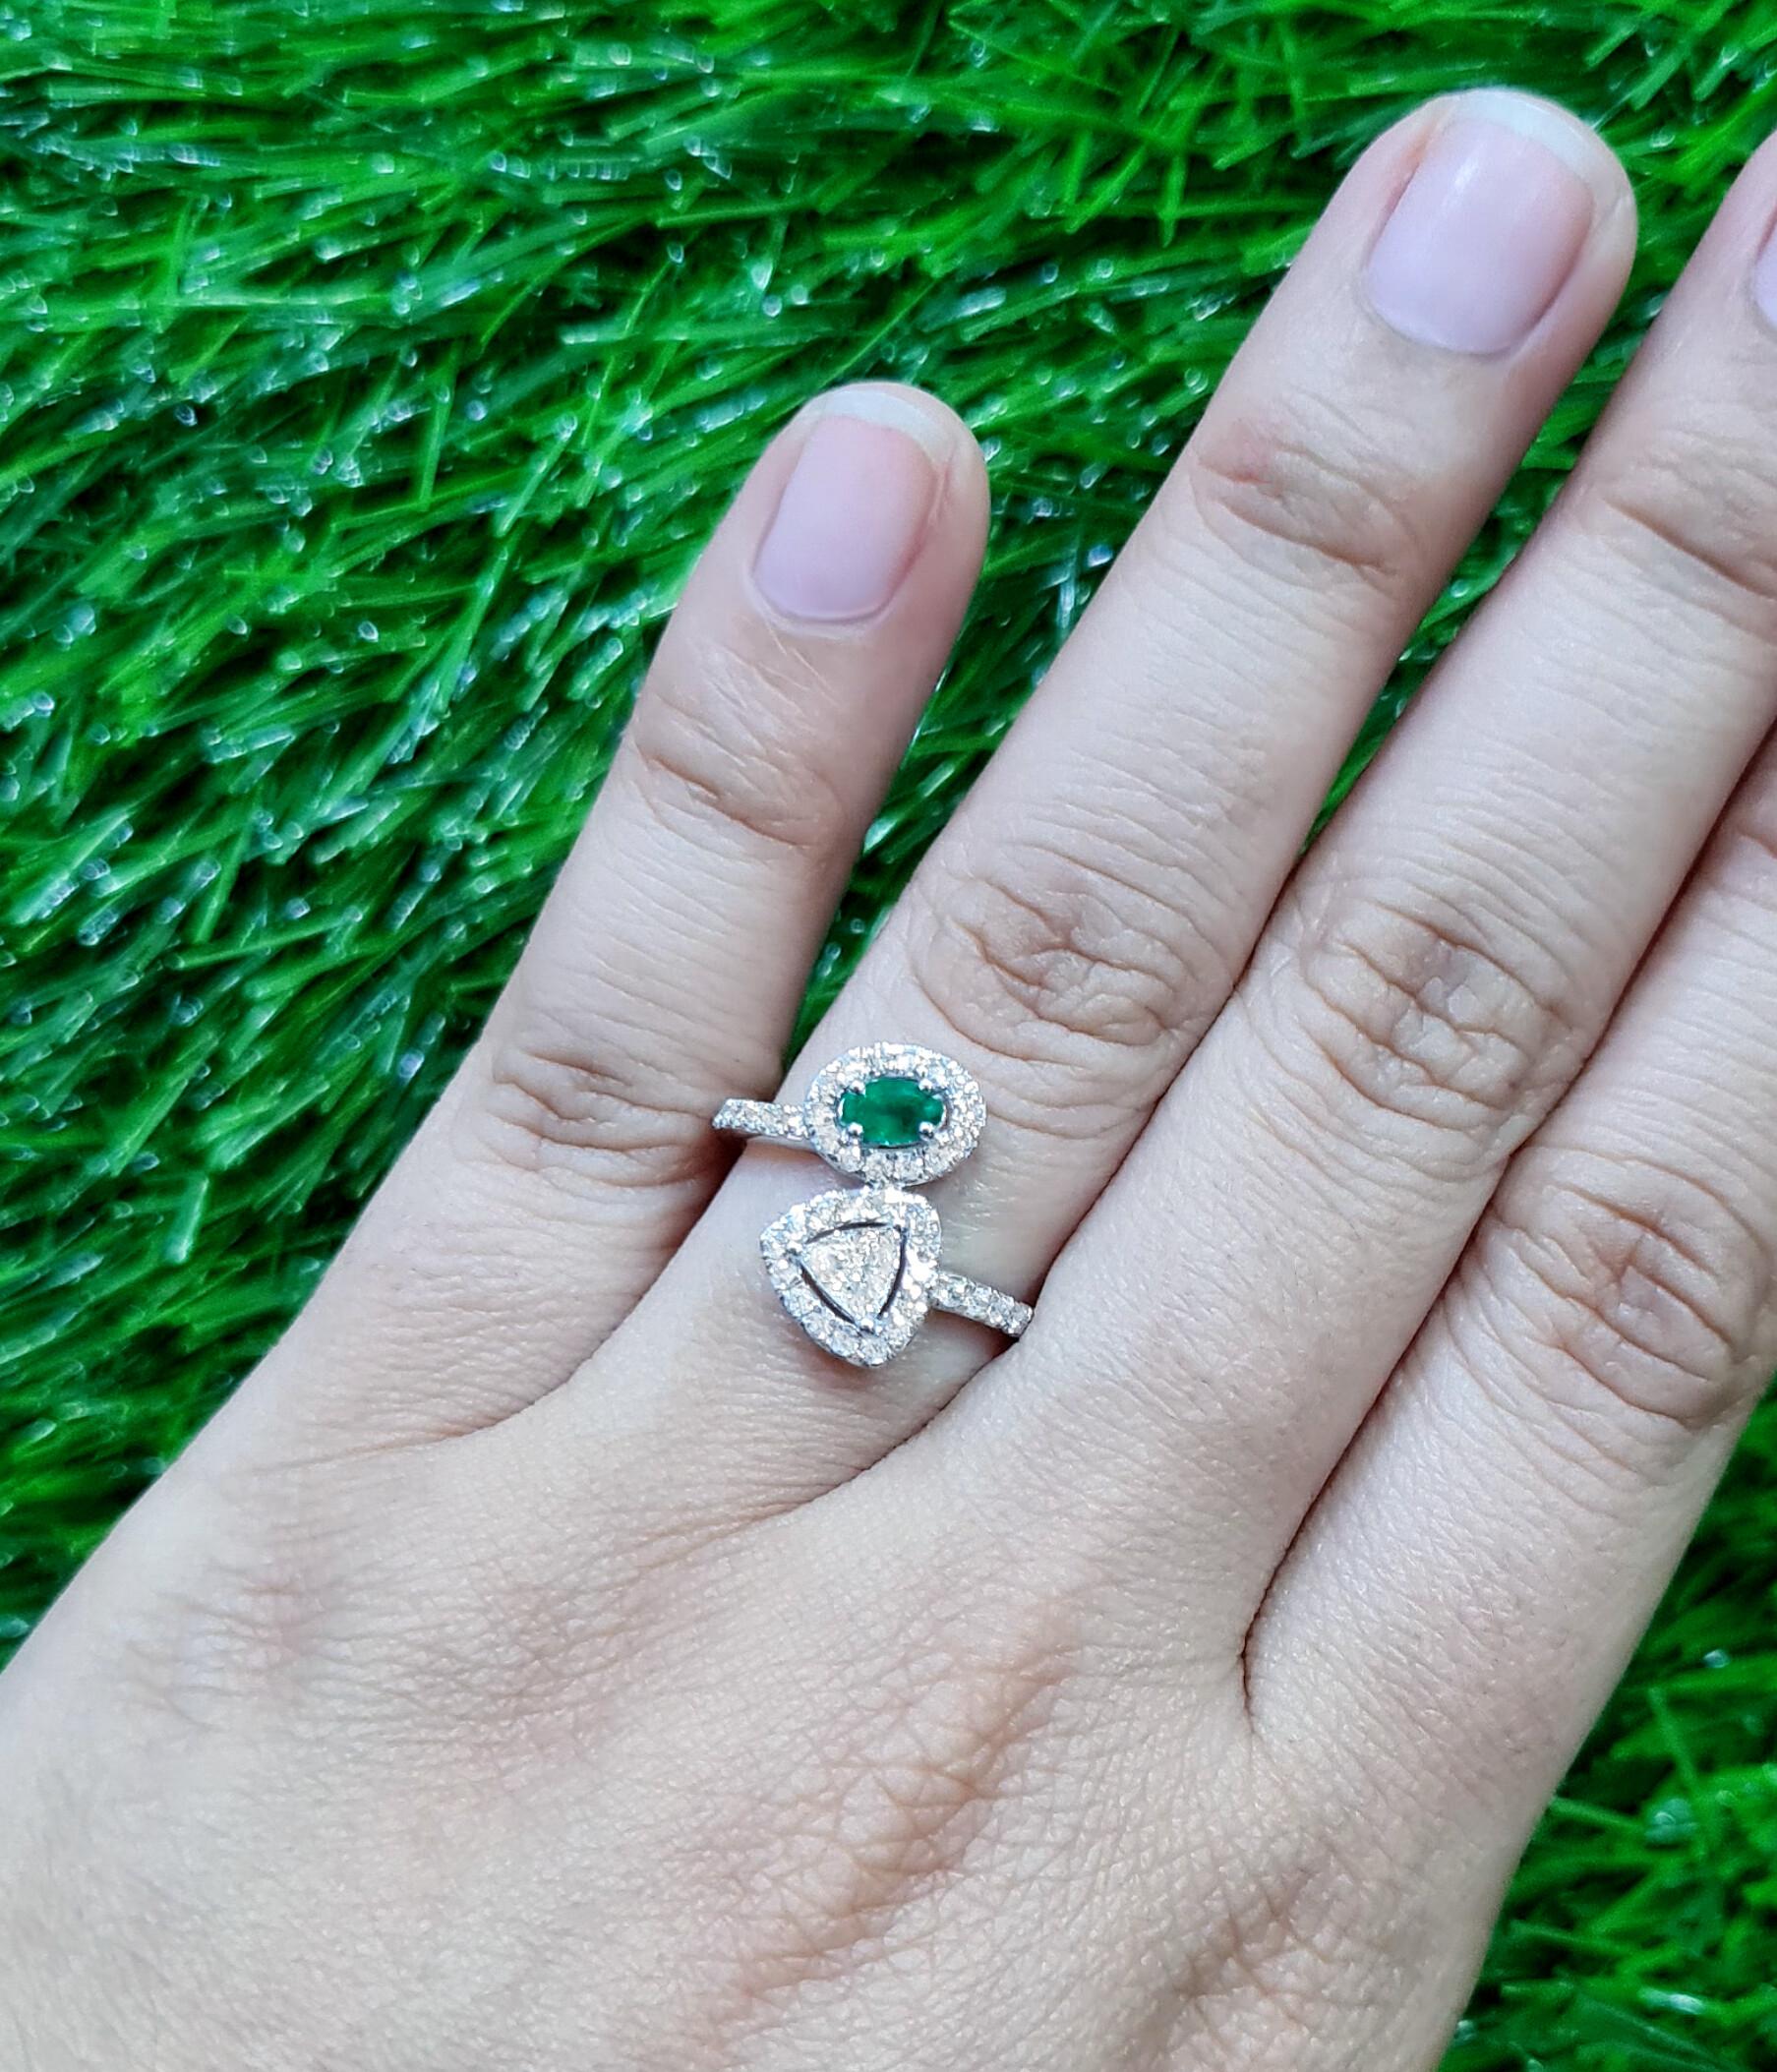 It comes with the Gemological Appraisal by GIA GG/AJP
All Gemstones are Natural
Oval Emerald = 0.26 Carat
Diamonds = 0.77 Carats
Metal: 18K White Gold
Ring Size: 7* US
*It can be resized complimentary
